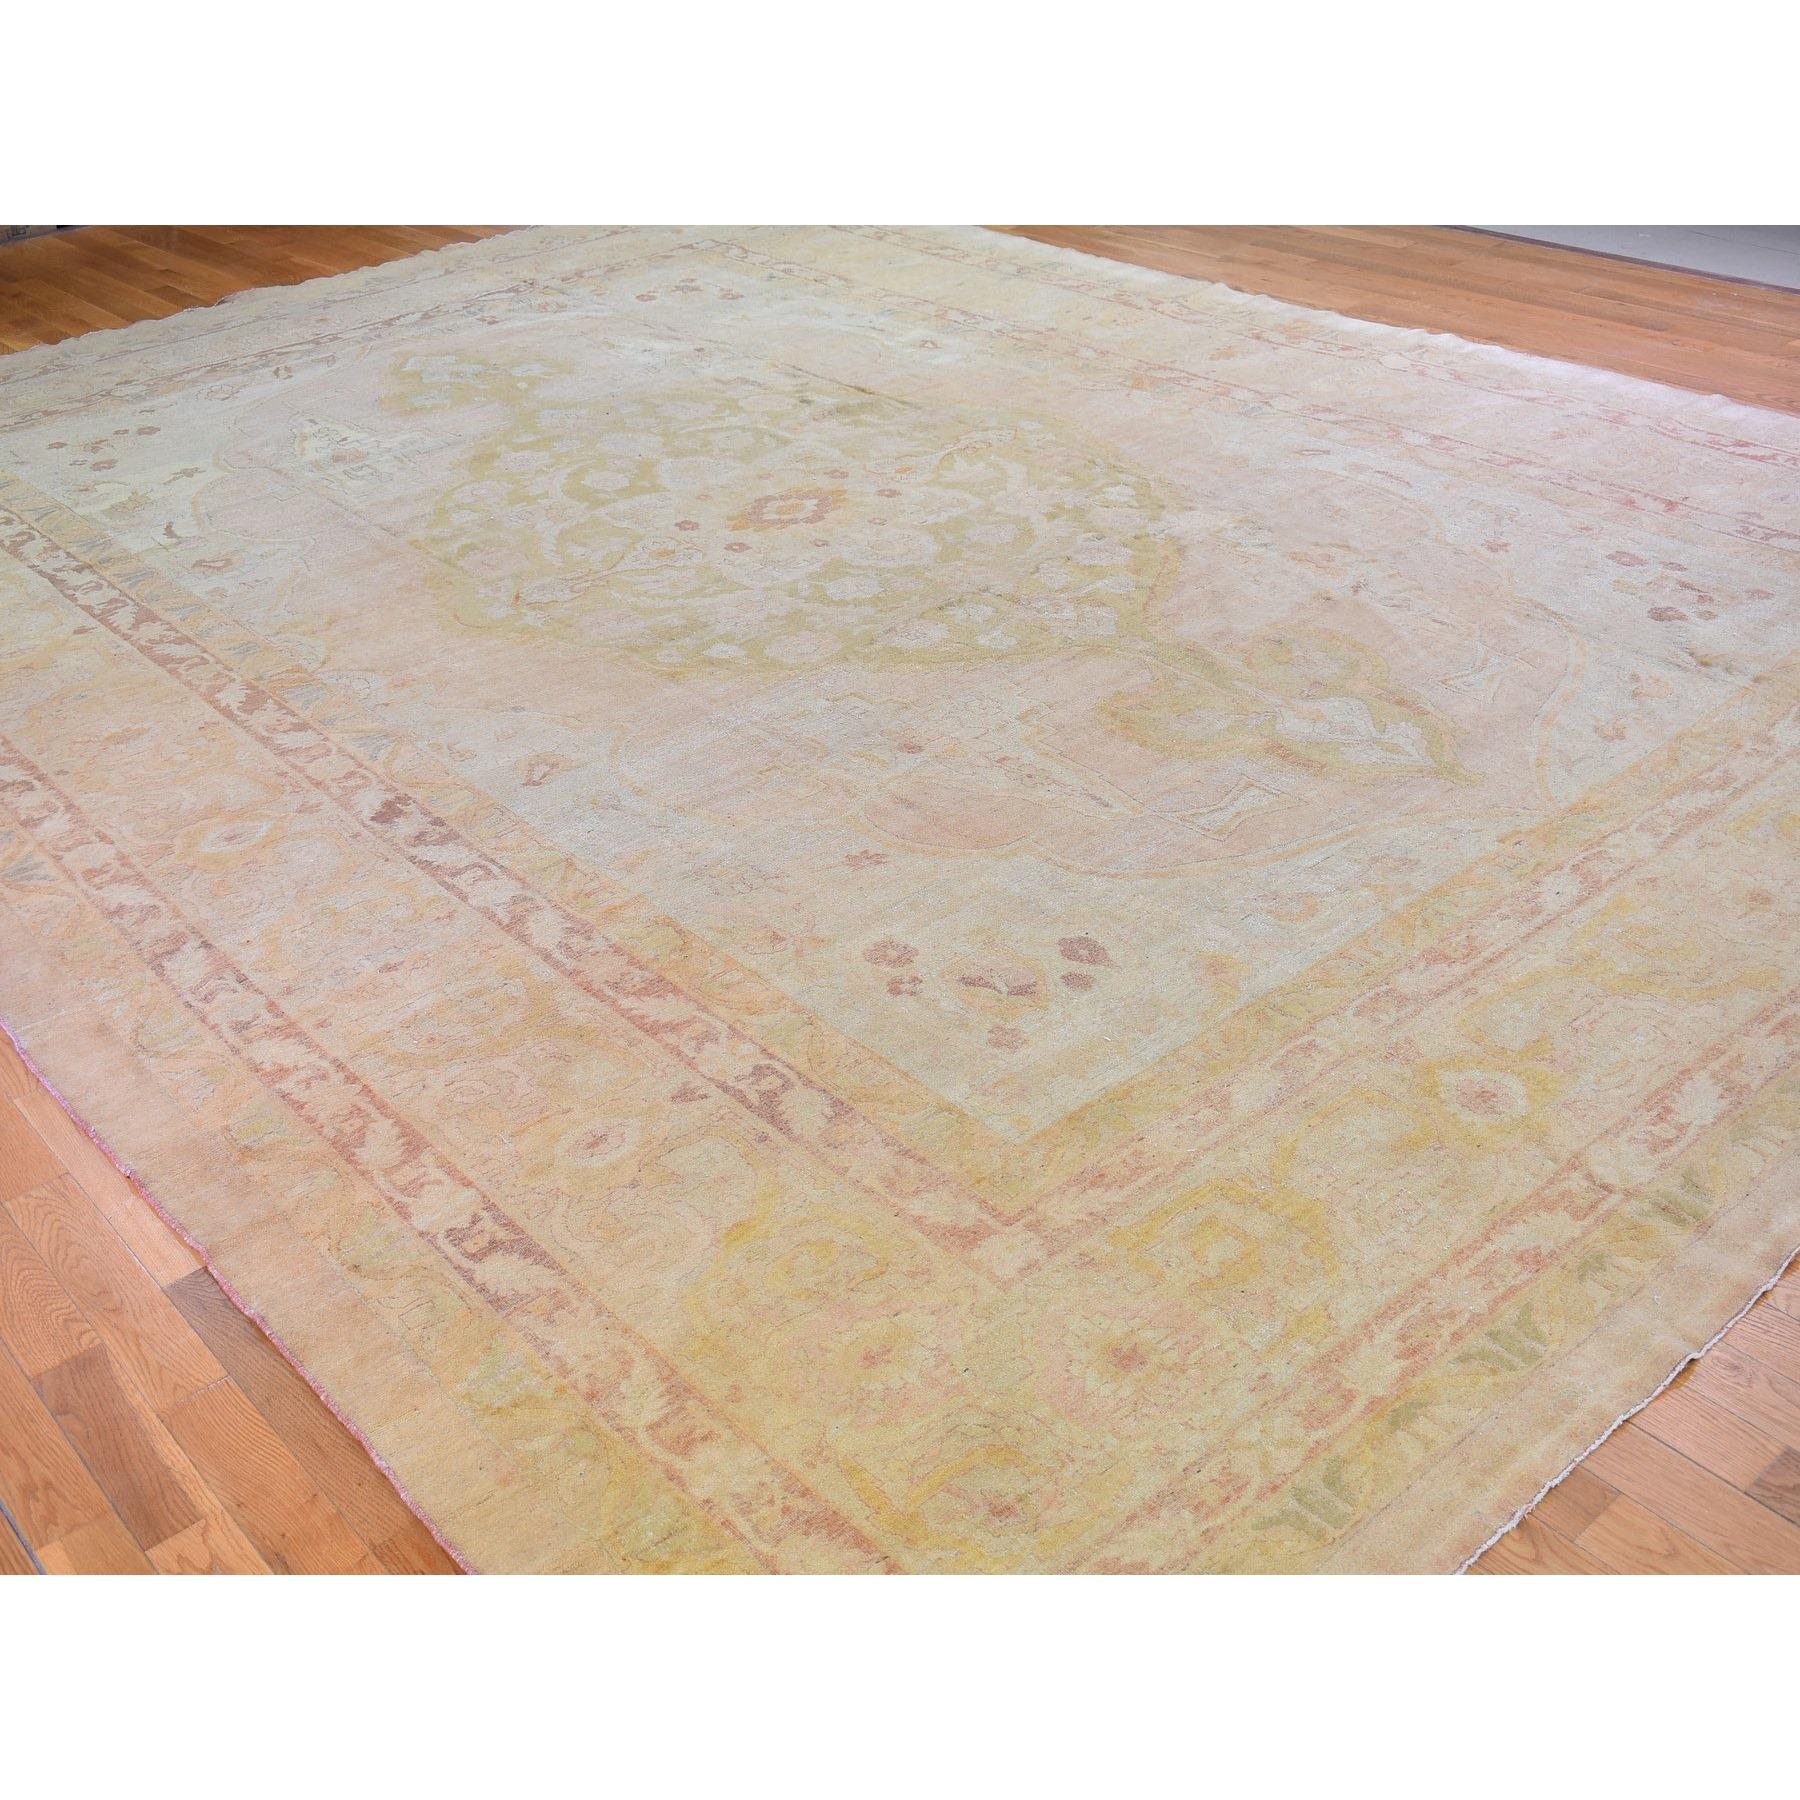 Medieval Oversized Antique Agra Good Cond Soft Colors Even Wear Pure Wool Handknotted Rug For Sale